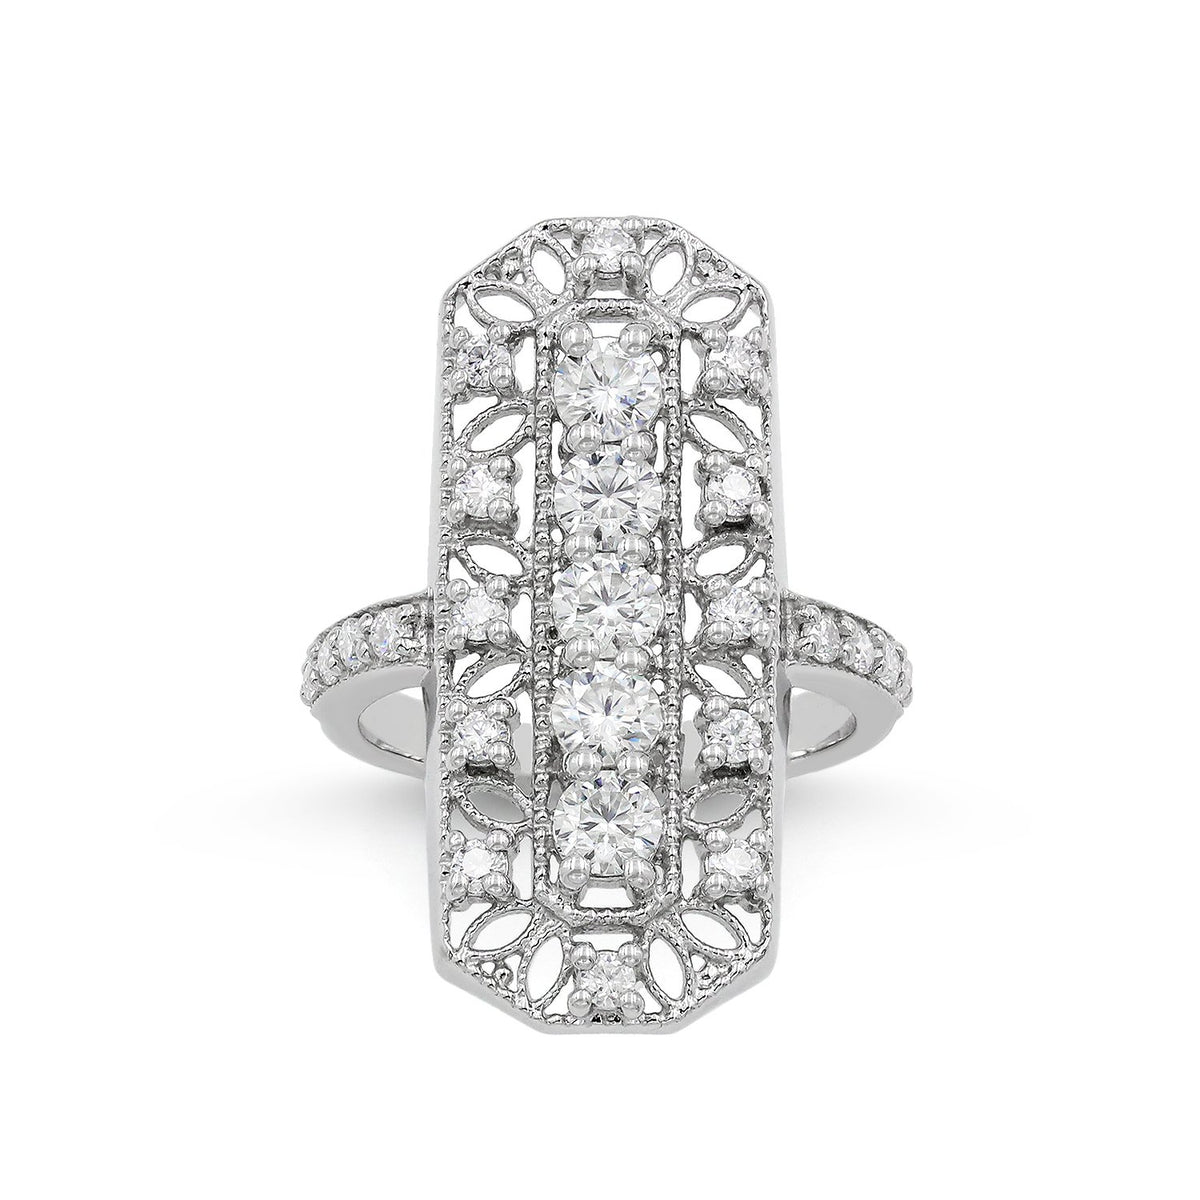 1.60 CTTW Moissanite Octagonal Filigree Cocktail Ring in 925 Sterling Silver